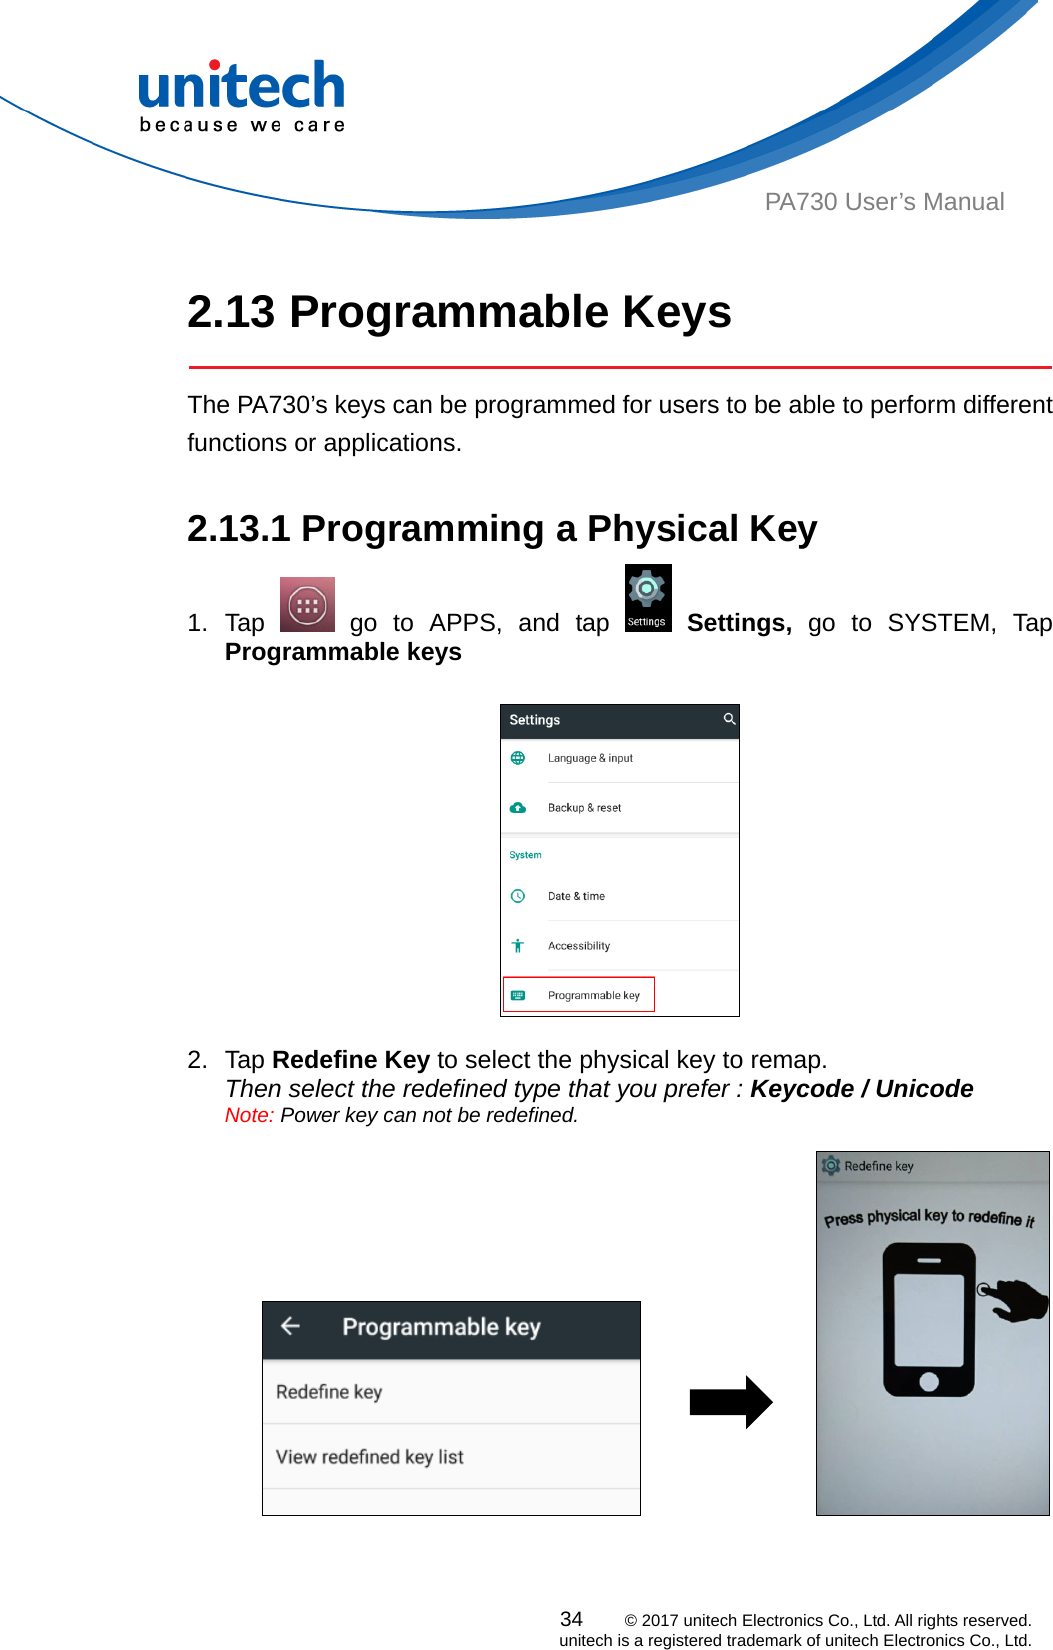  PA730 User’s Manual   2.13 Programmable Keys   The PA730’s keys can be programmed for users to be able to perform different functions or applications.  2.13.1 Programming a Physical Key 34    © 2017 unitech Electronics Co., Ltd. All rights reserved.   unitech is a registered trademark of unitech Electronics Co., Ltd. 1. Tap   go to APPS, and tap   Settings, go to SYSTEM, Tap Programmable keys    2. Tap Redefine Key to select the physical key to remap.   Then select the redefined type that you prefer : Keycode / Unicode   Note: Power key can not be redefined.                     